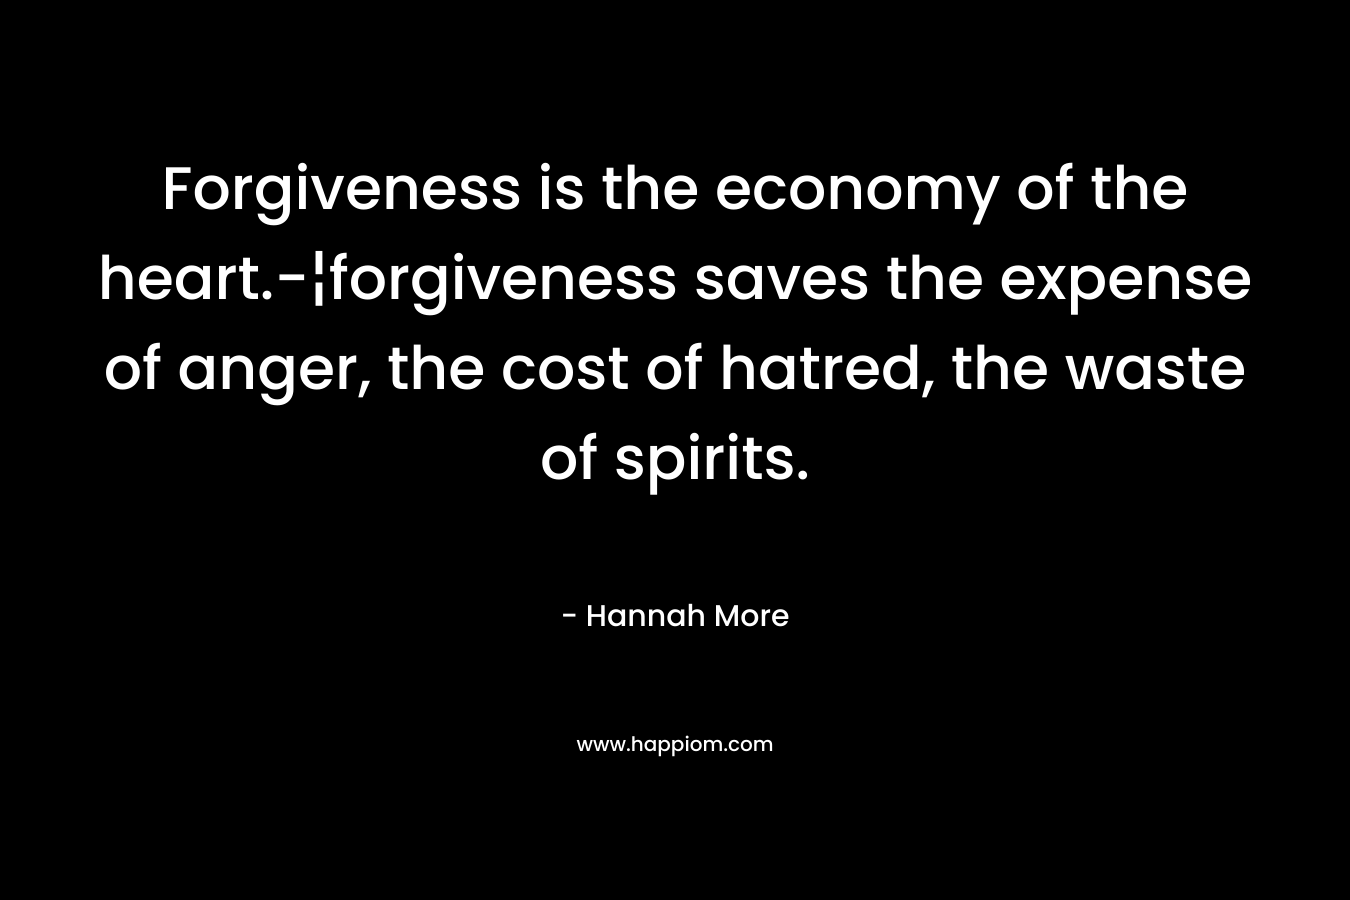 Forgiveness is the economy of the heart.-¦forgiveness saves the expense of anger, the cost of hatred, the waste of spirits.